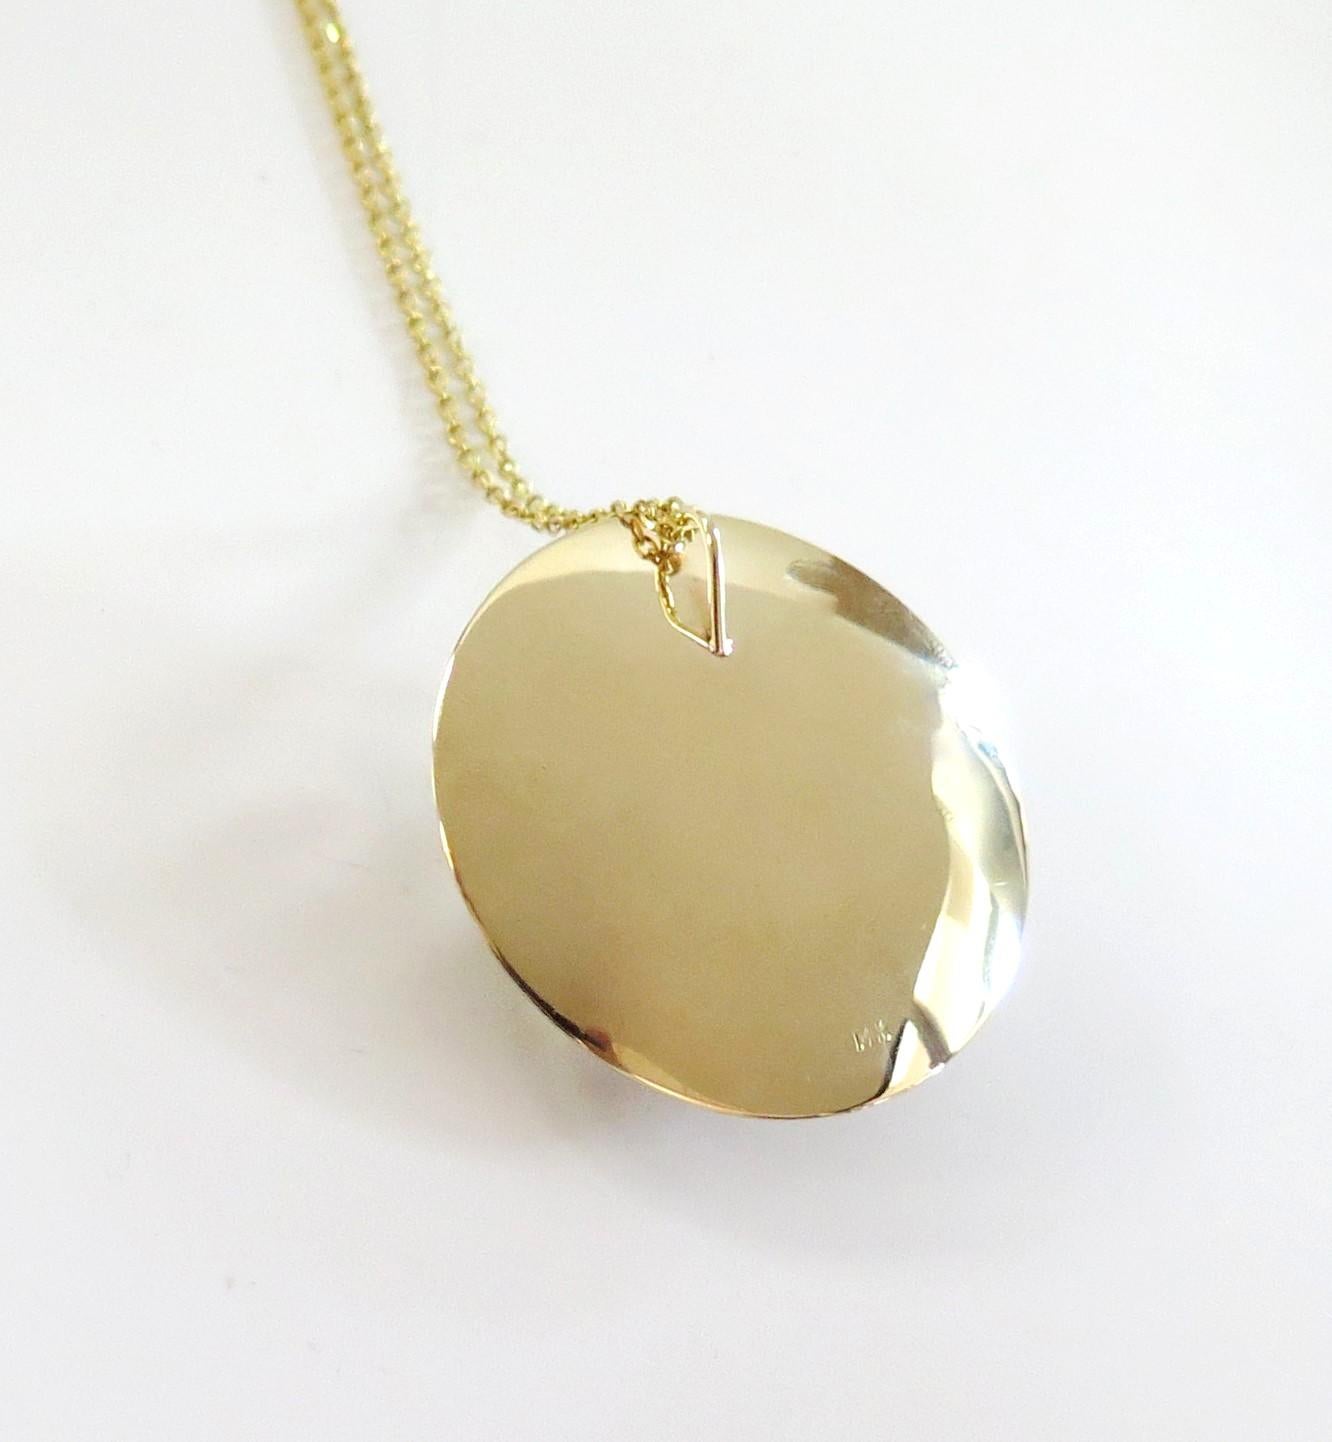 Retro Large Round 14 Karat Gold Pendant with Cultured Pearls and Diamonds